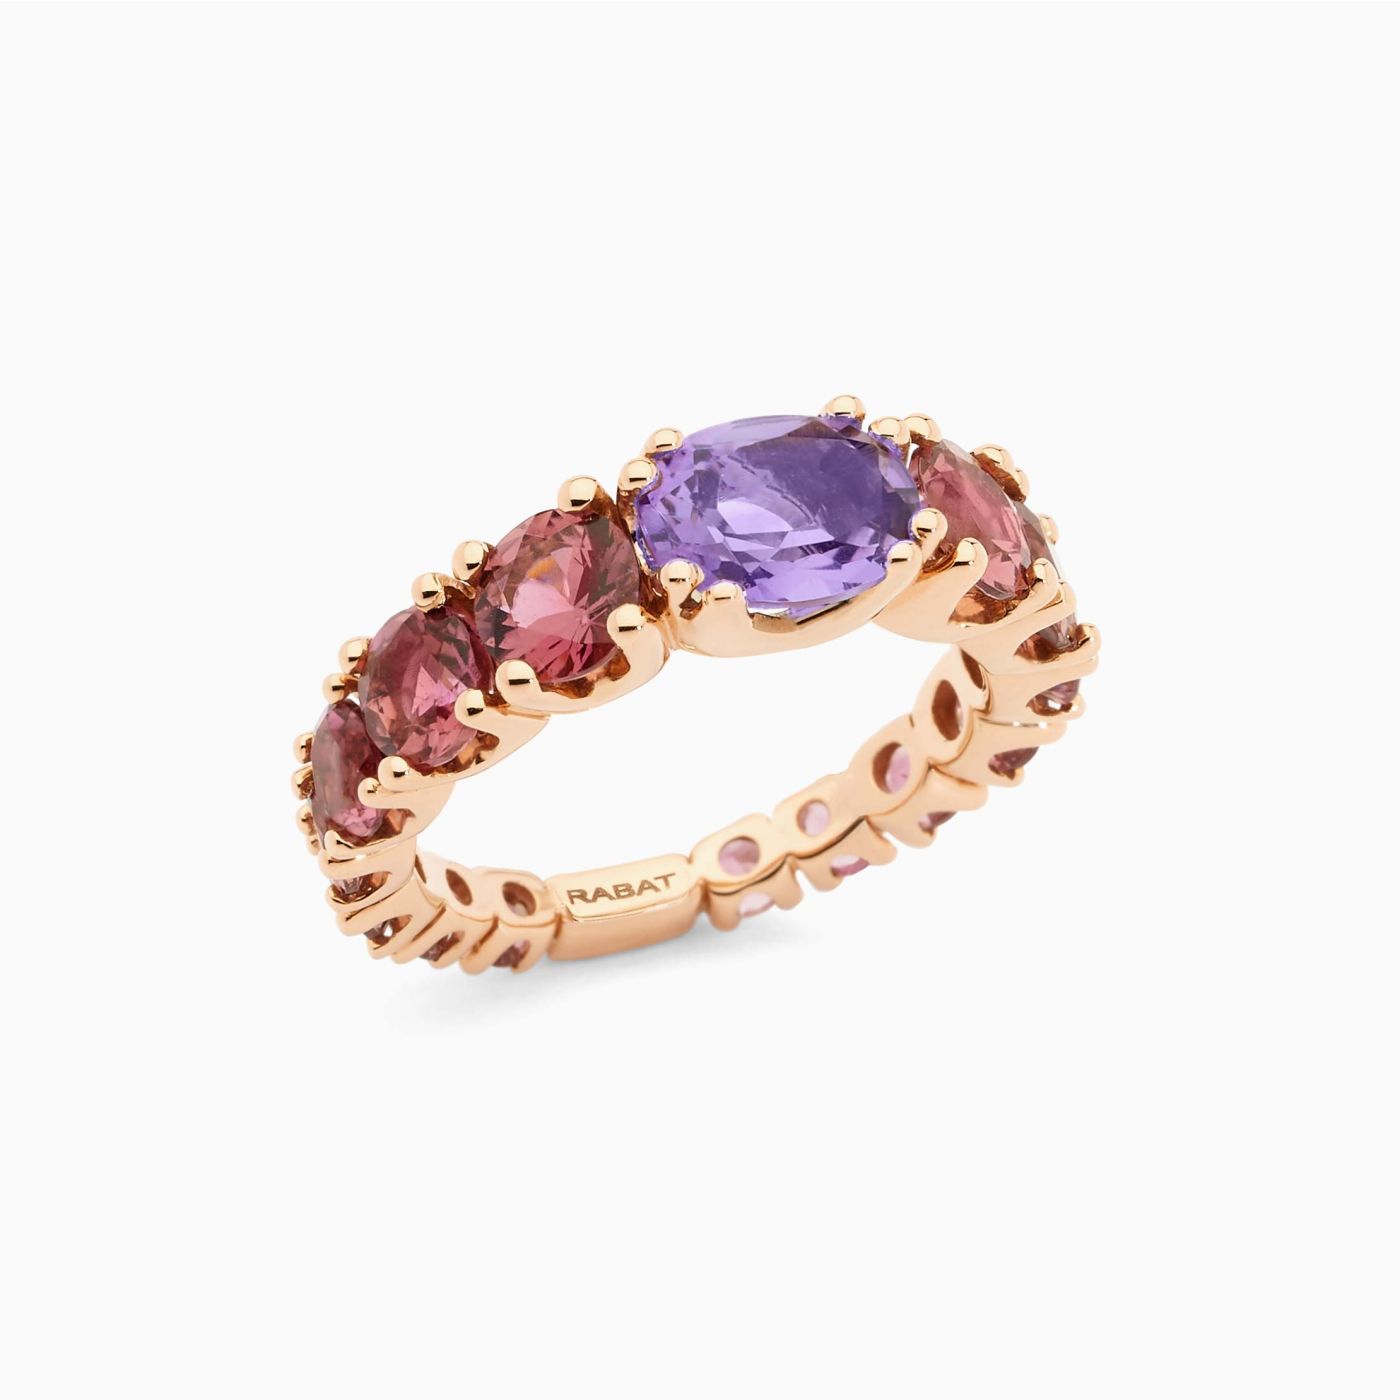 Rose gold with amethyst in the center solitaire ring